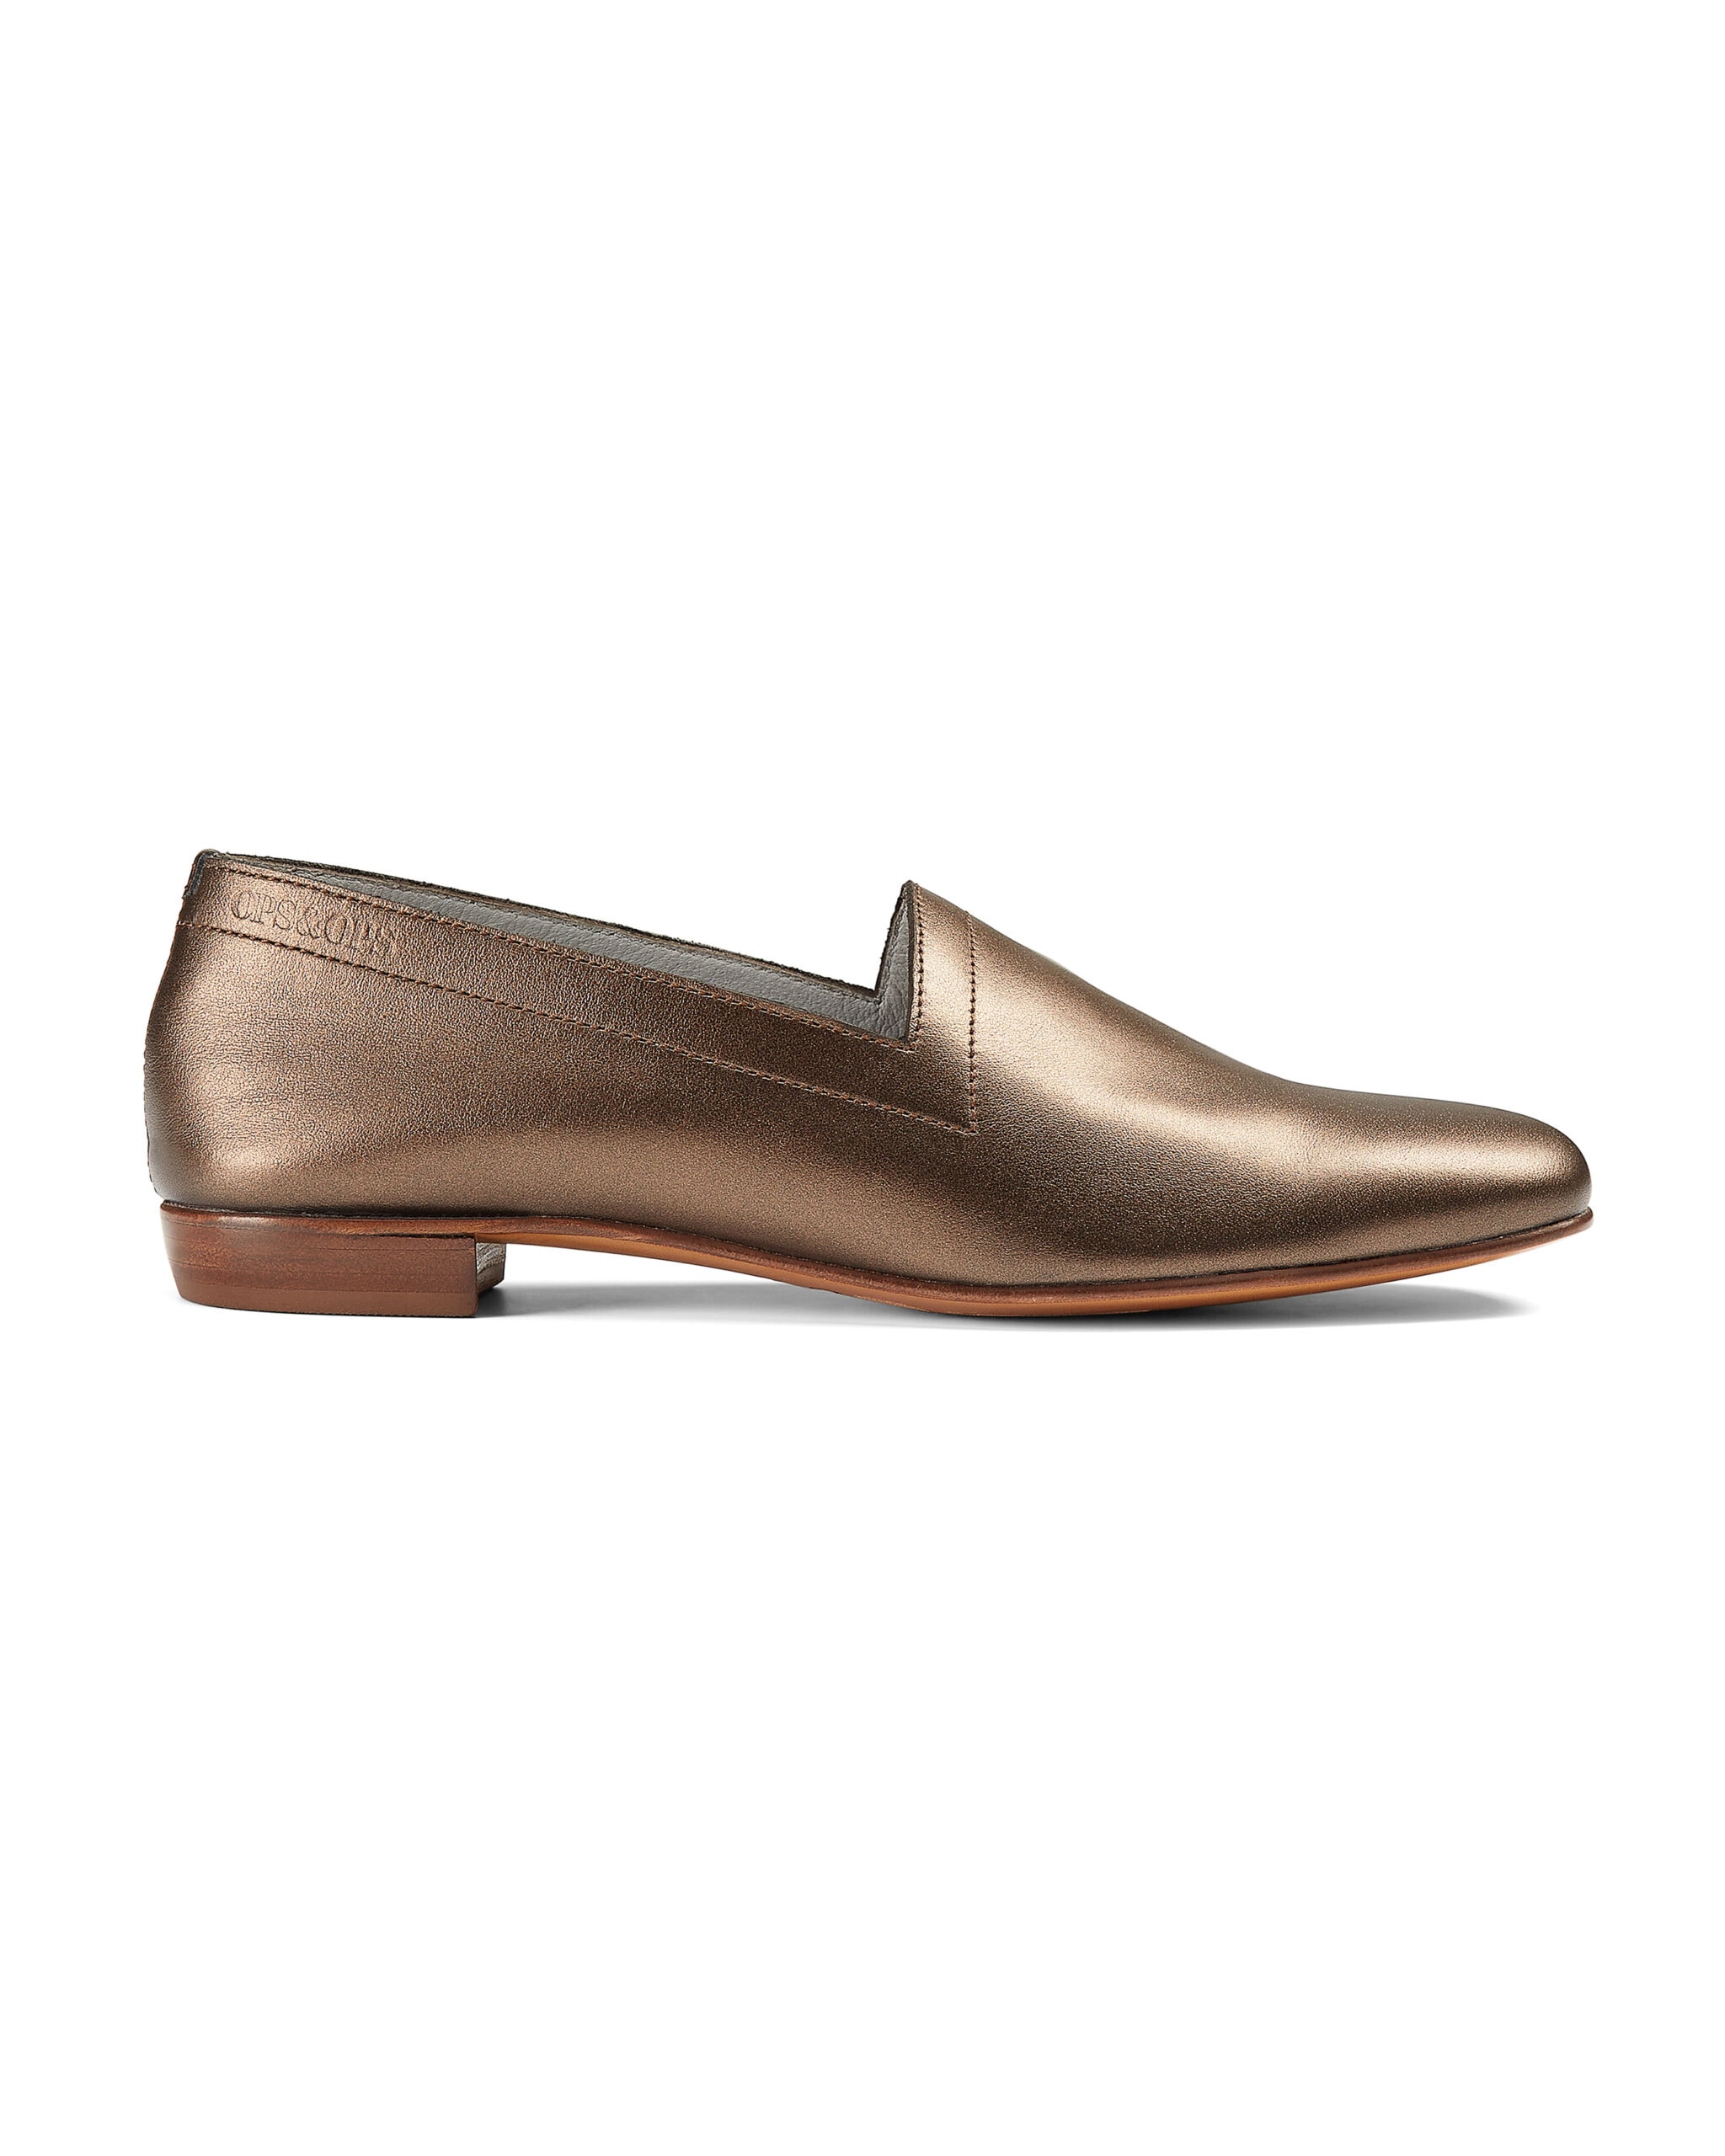 Ops&Ops No17 Bronze metallic leather loafers, side view